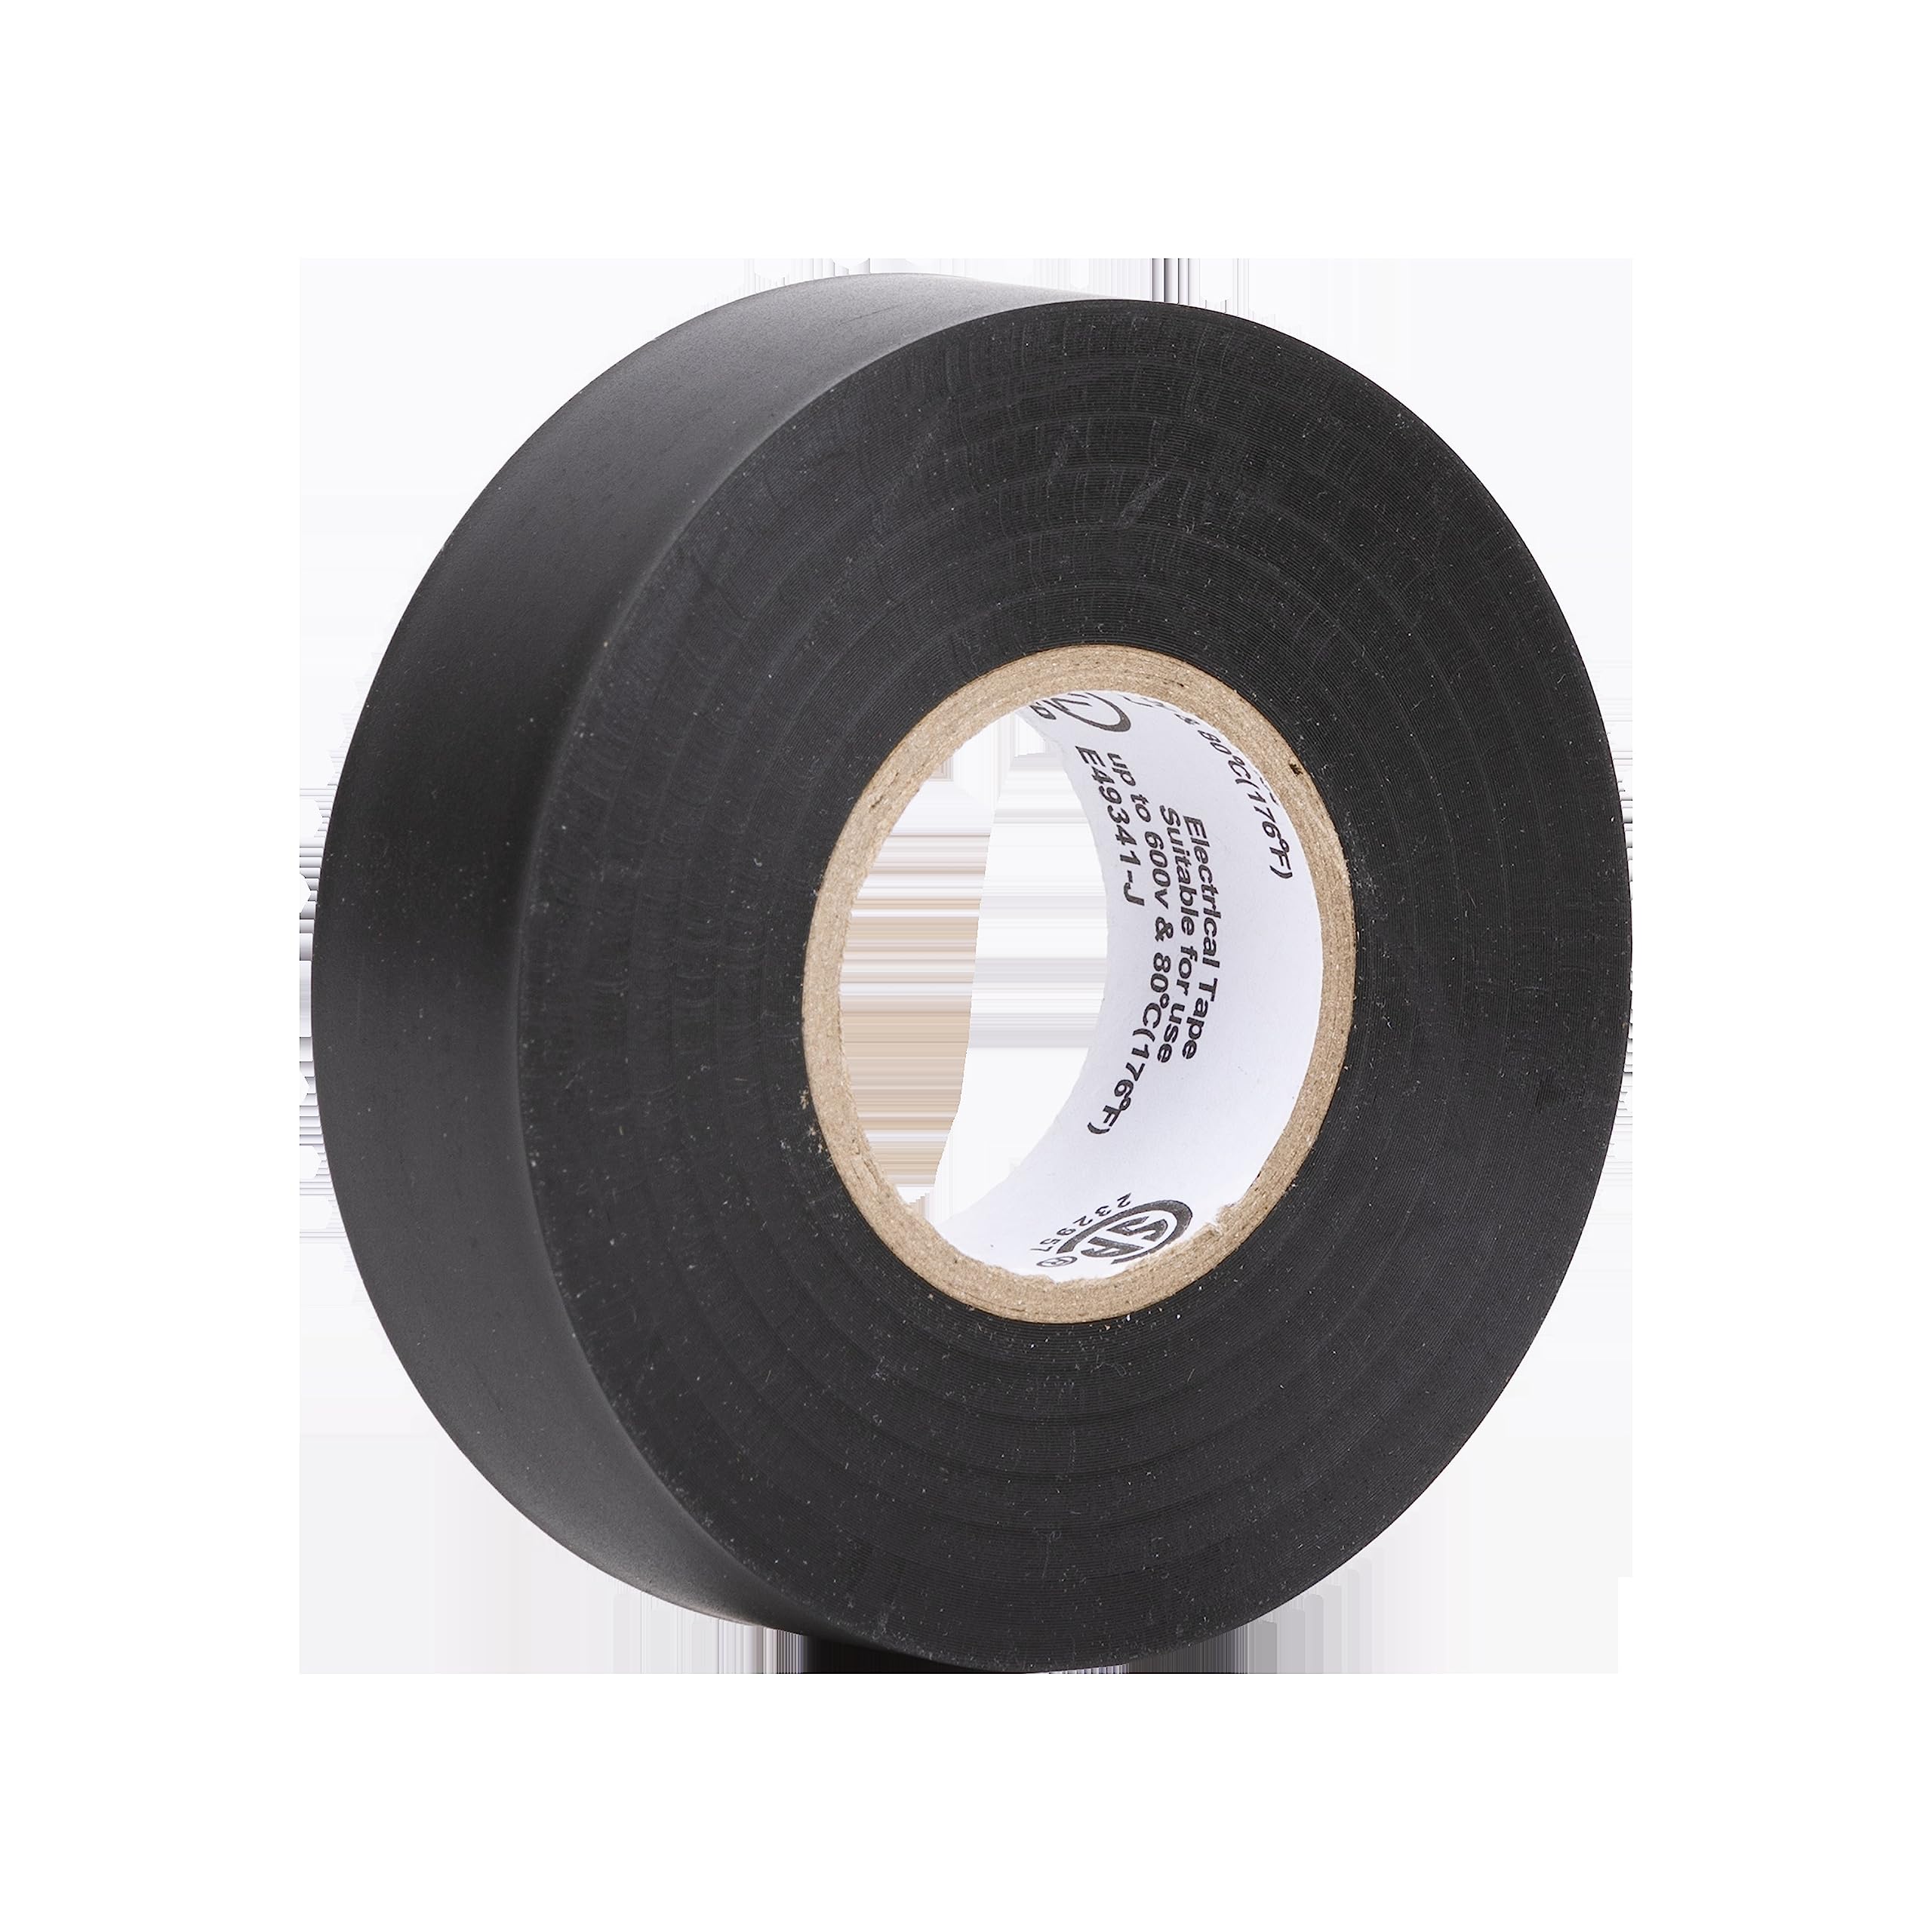 Duck Brand 282289 Economy Electrical Tape, 3/4-Inch by 60 Feet, Single Roll, Black $1.17